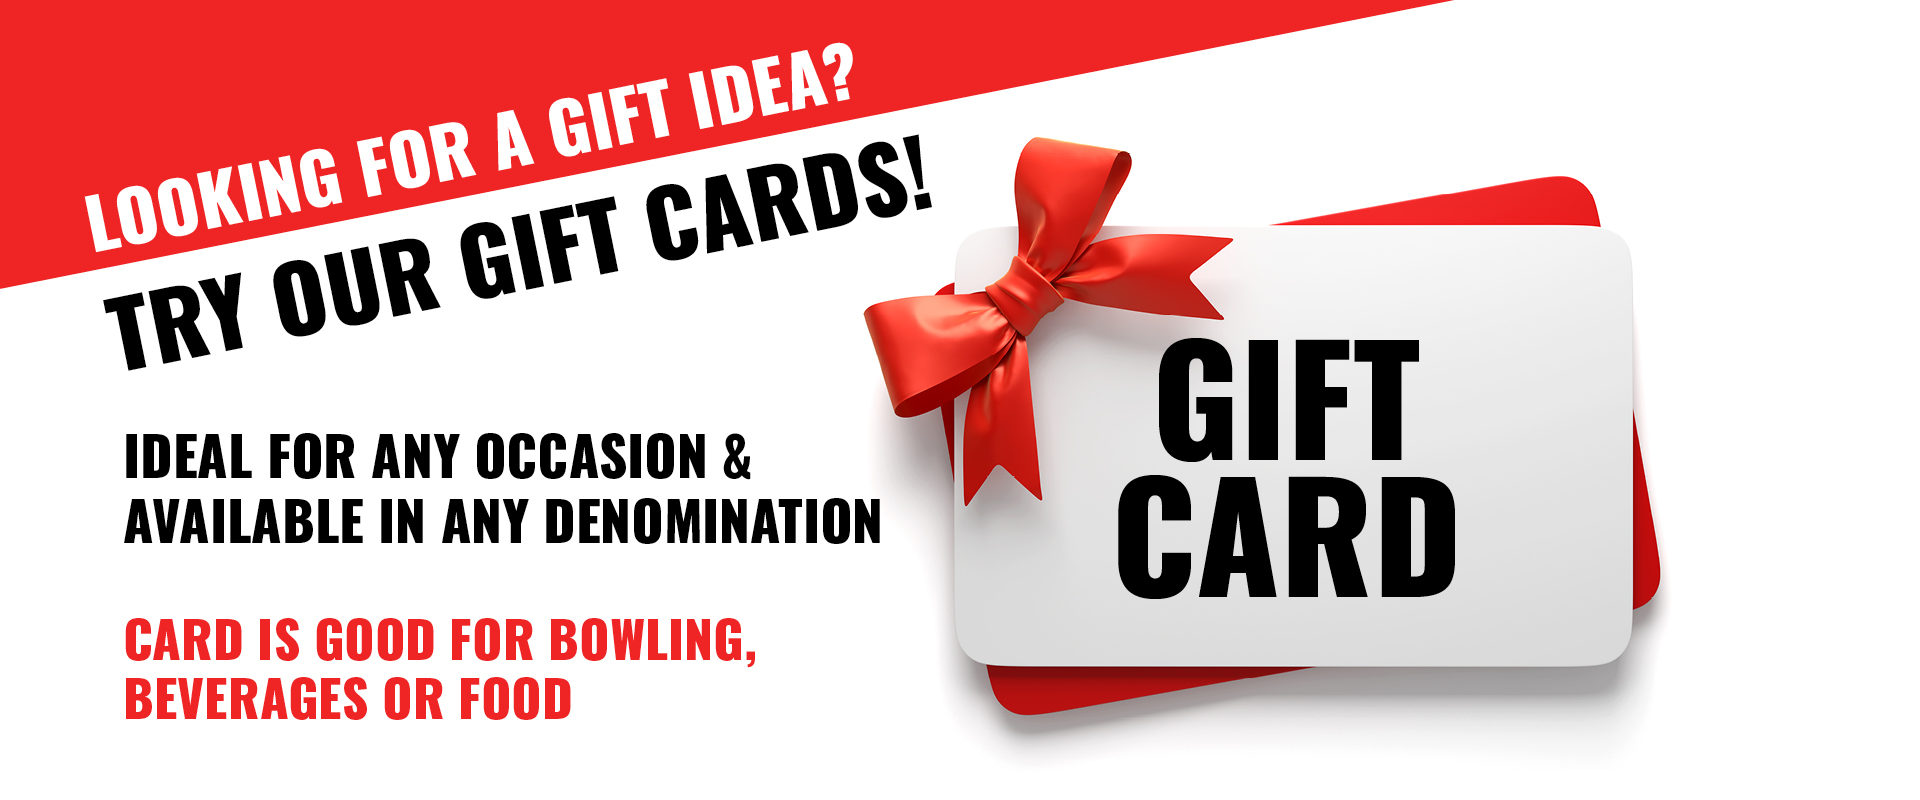 TRY OUR GIFT CARD